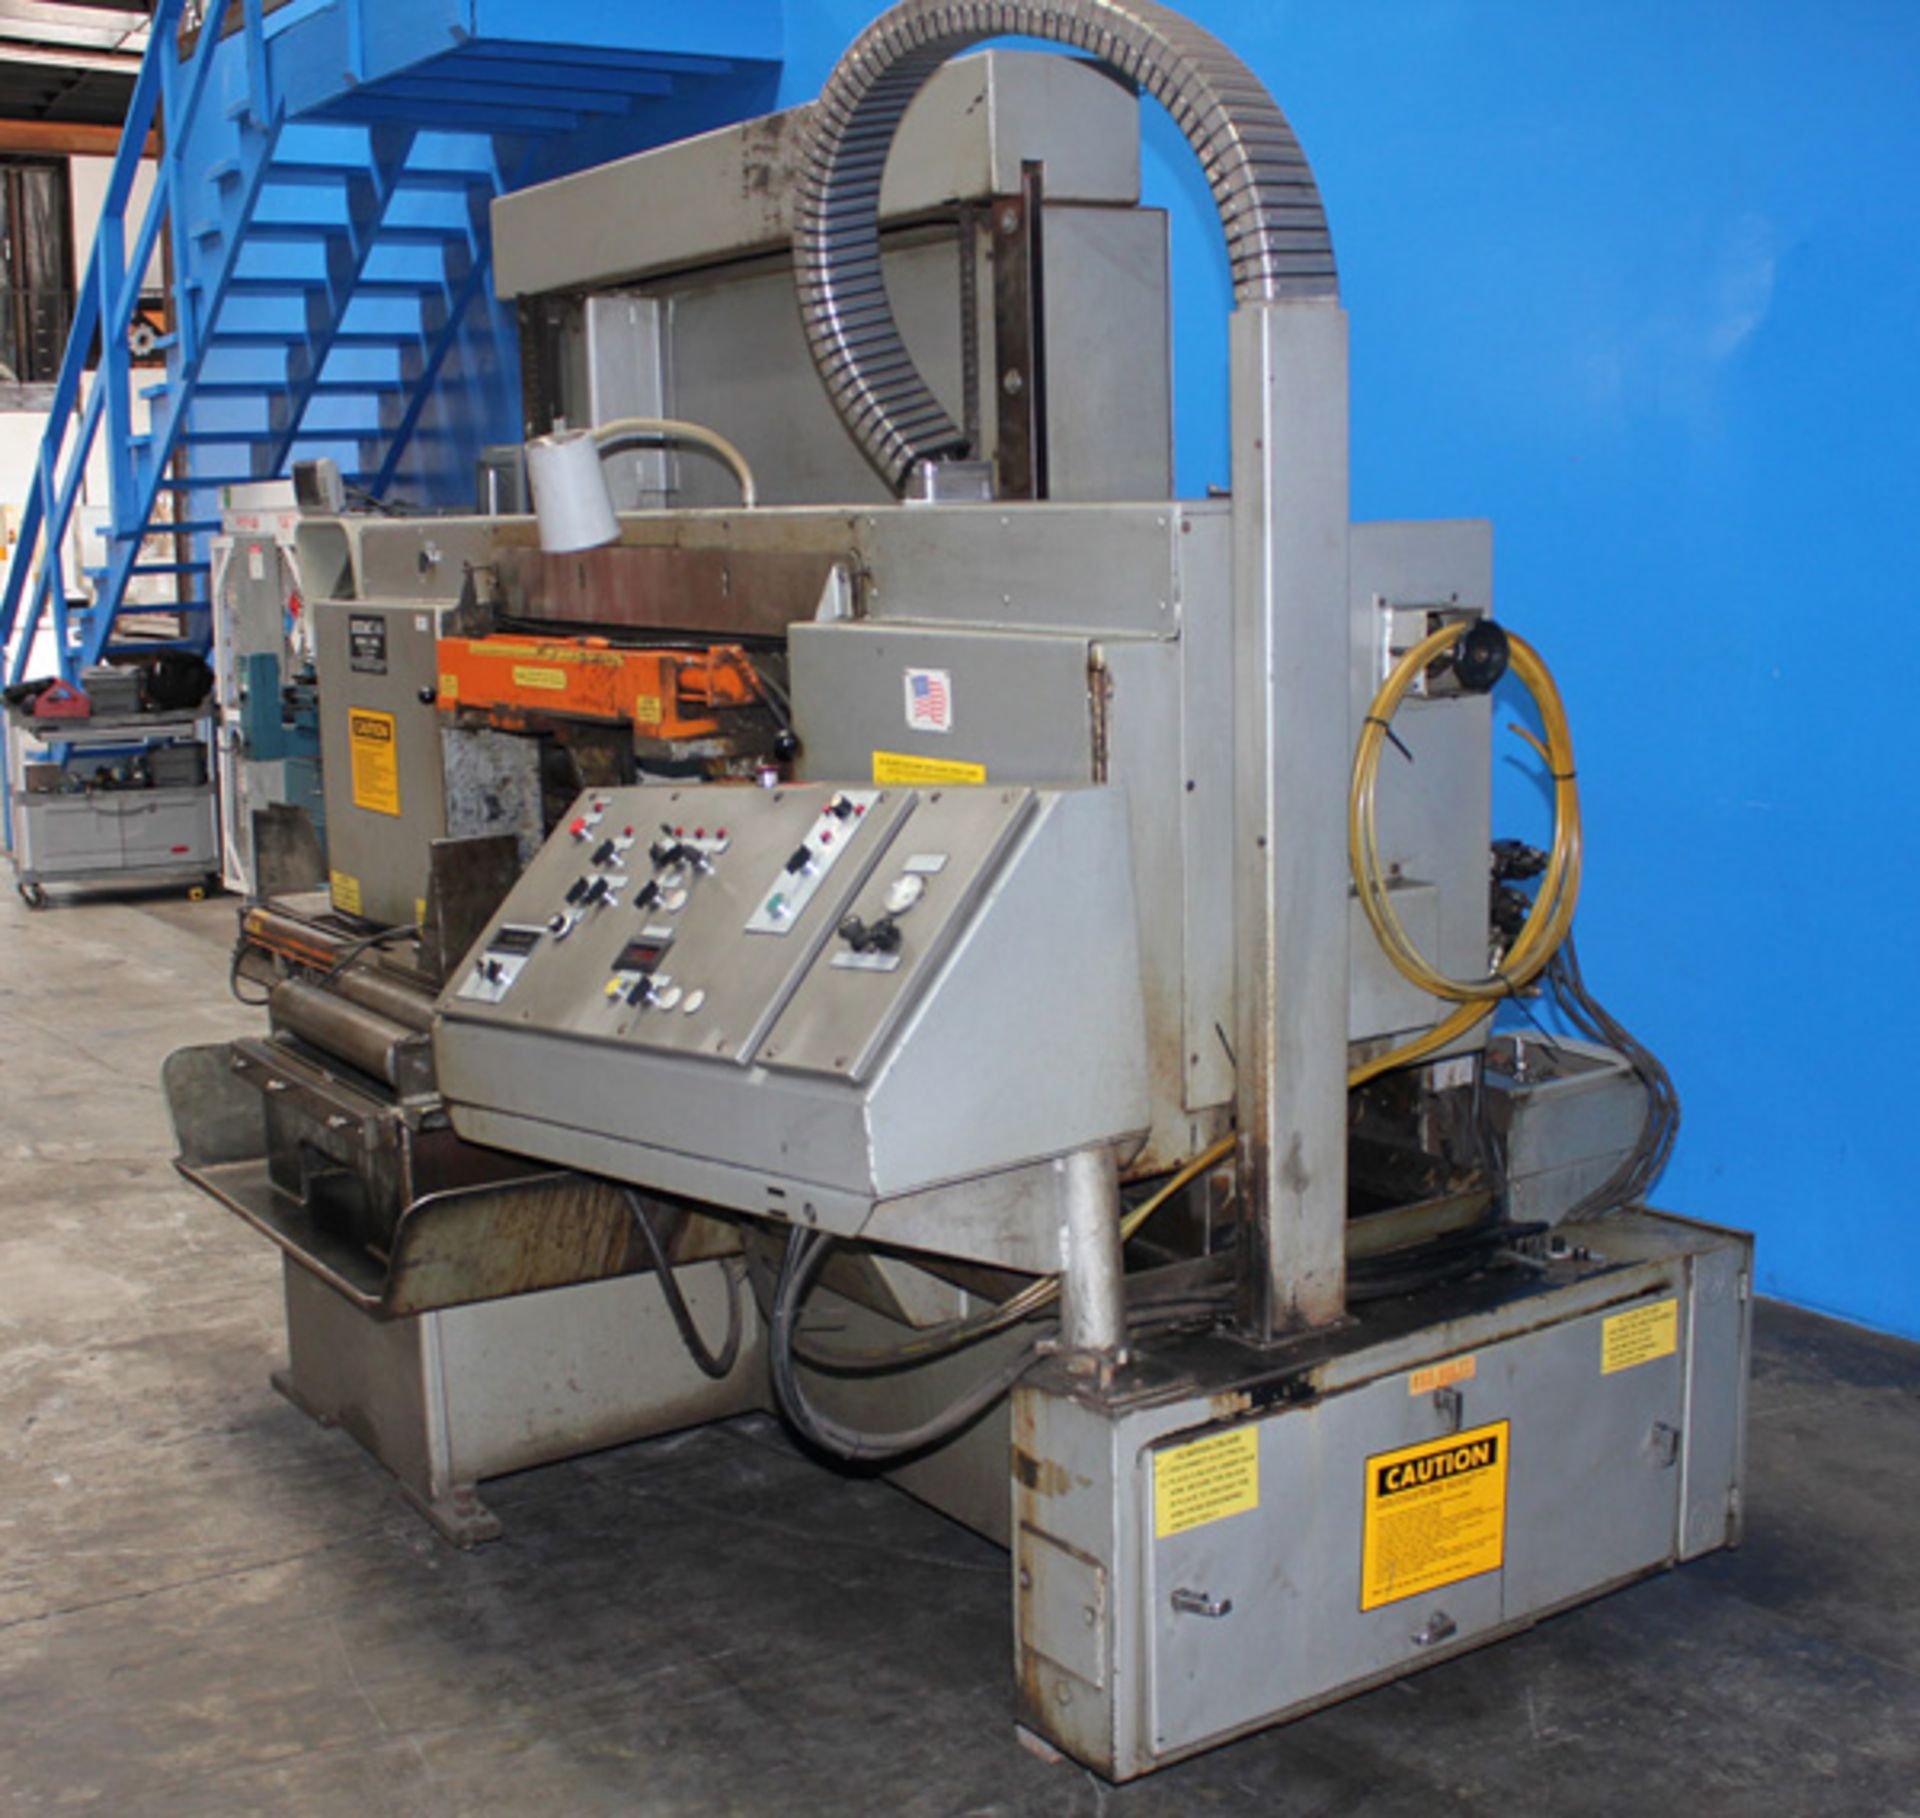 1996 HEM Semi-Automatic Horizontal Bandsaw, 18" x 20", Mdl: H130 HM- DC, S/N: 524196, Located In: - Image 2 of 8